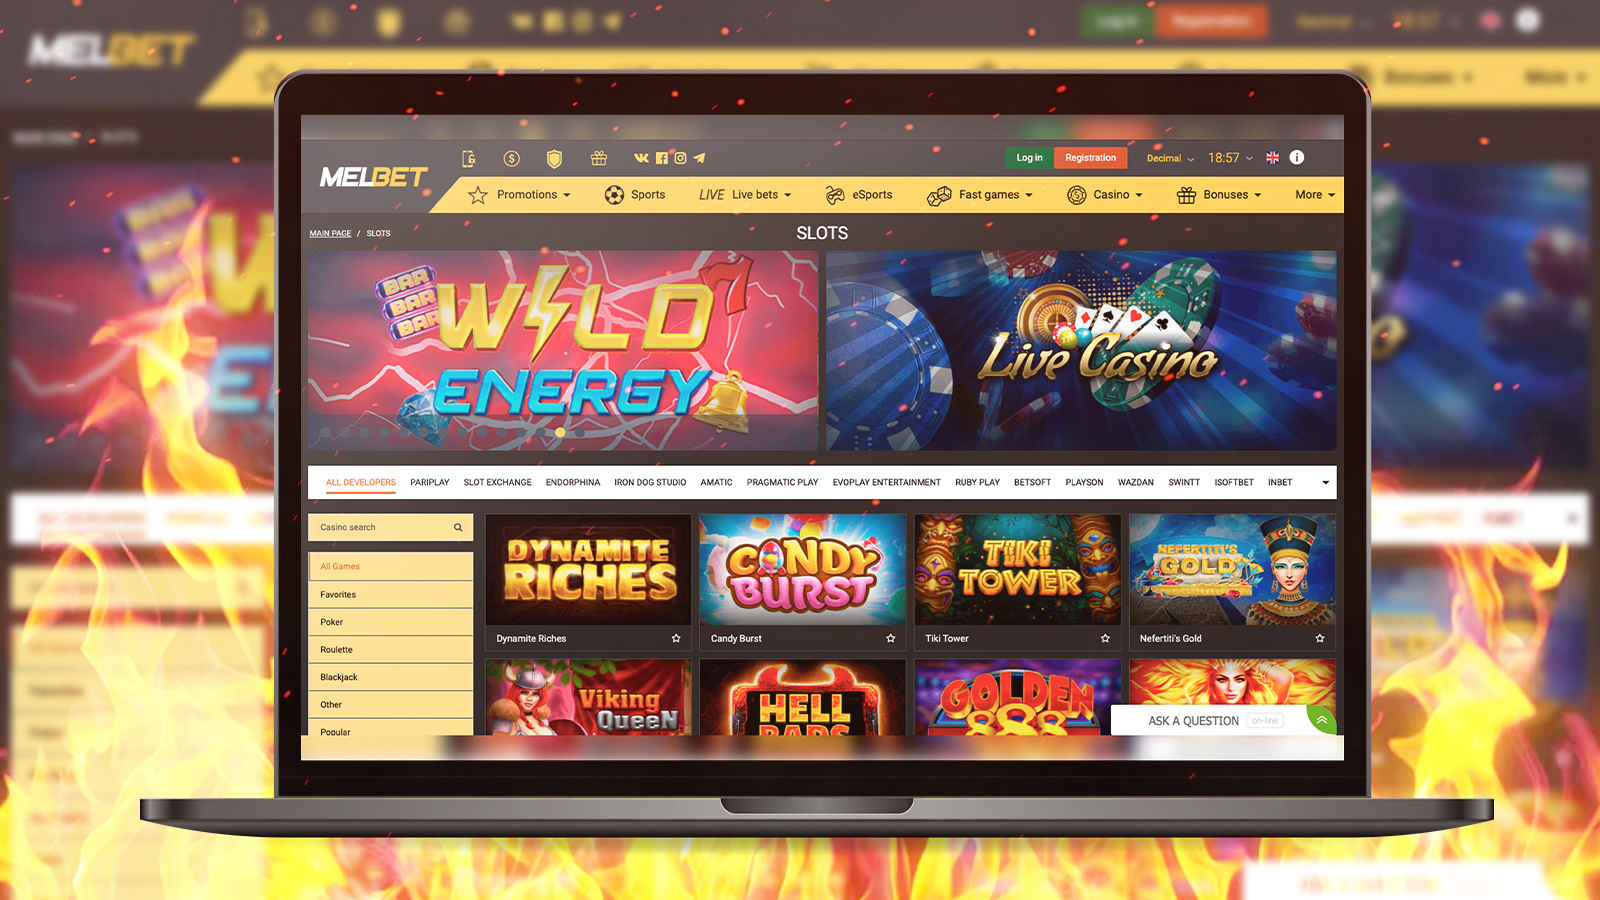 Sign up for Melbet and start gambling with bonuses and other benefits.